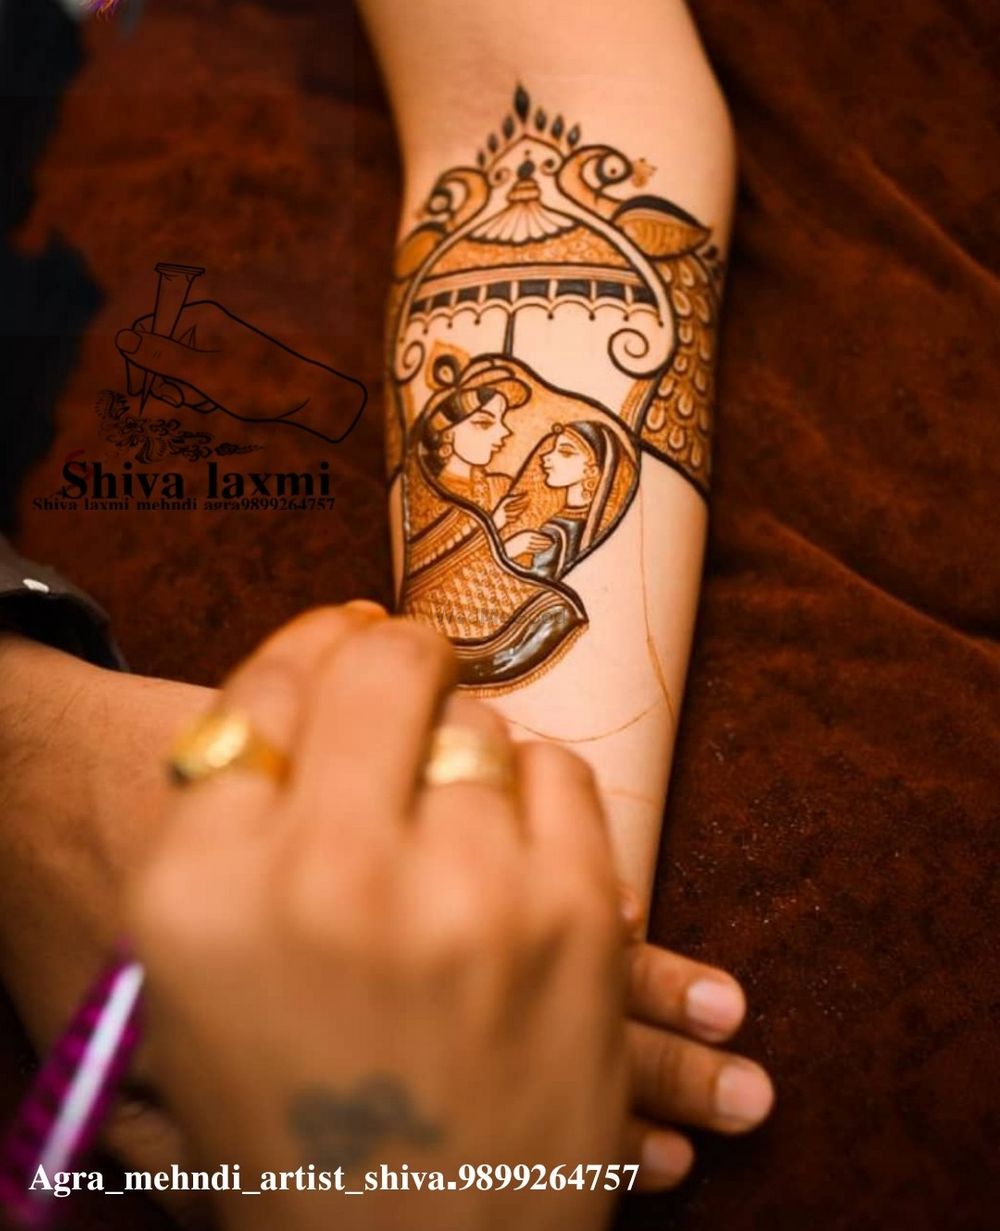 Photo From Some pictures taken while working in Shiva,laxmi team - By Shivalaxmi Mehndi Agra